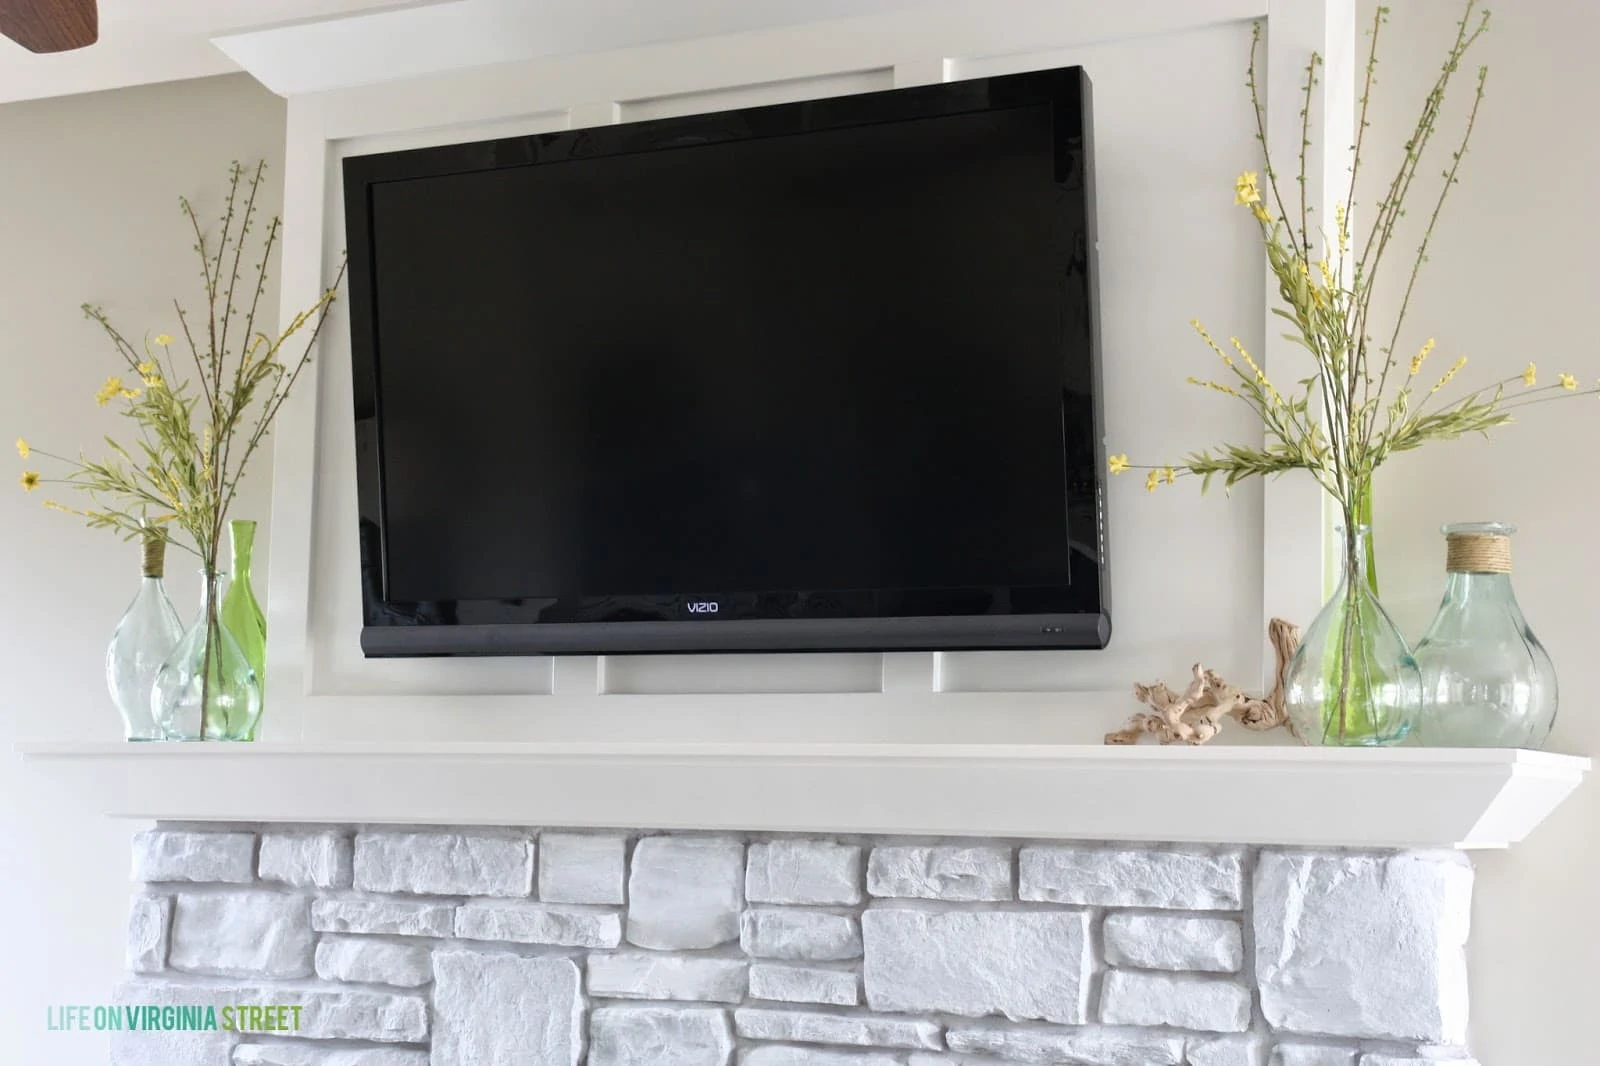 The final look- TV mounted above the updated whitewashed fireplace stone.